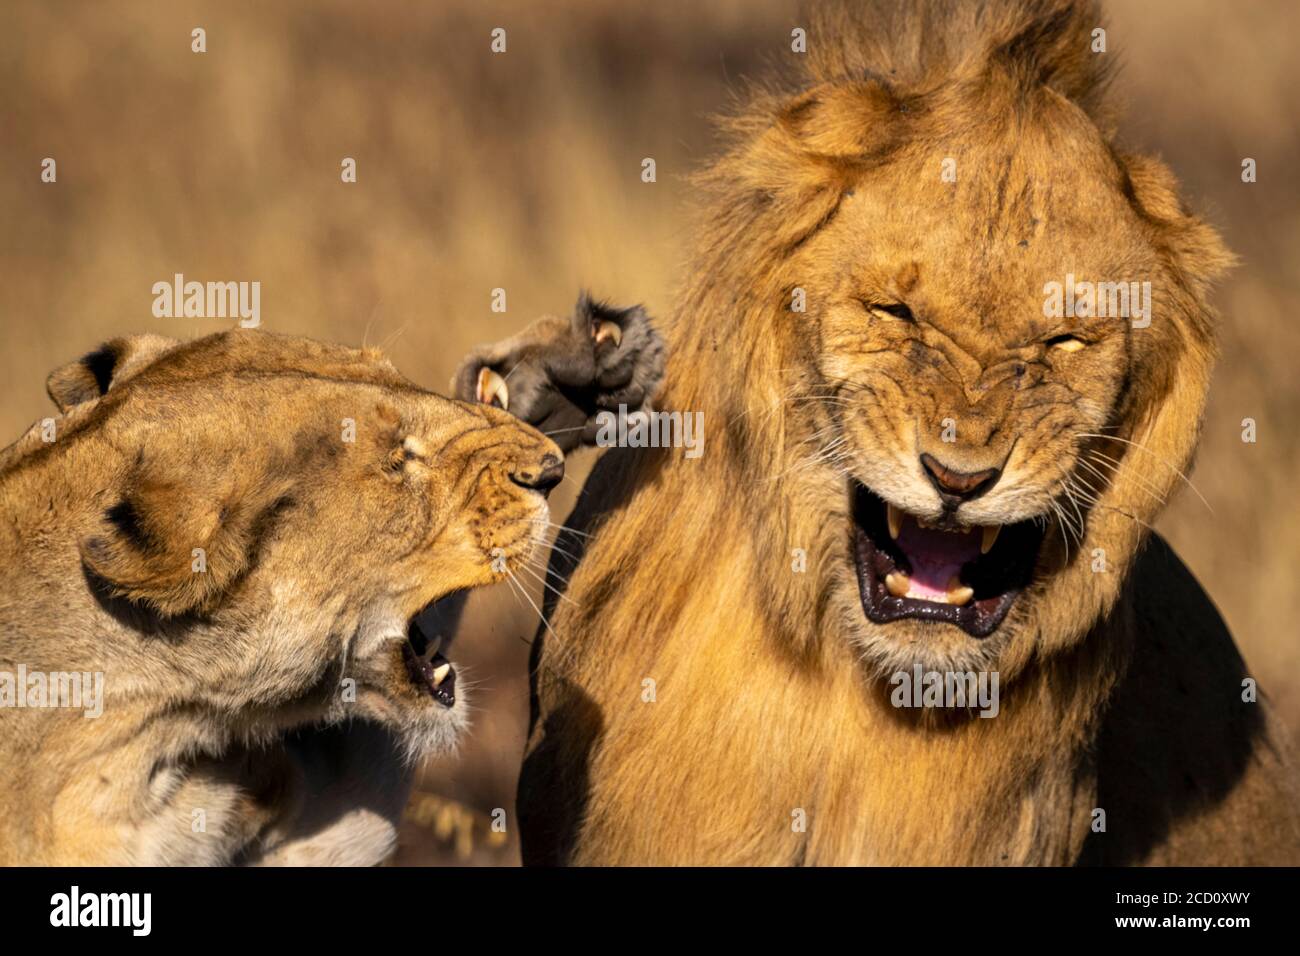 Close-up of angry lioness slapping male lion during fight; Tanzania Stock Photo